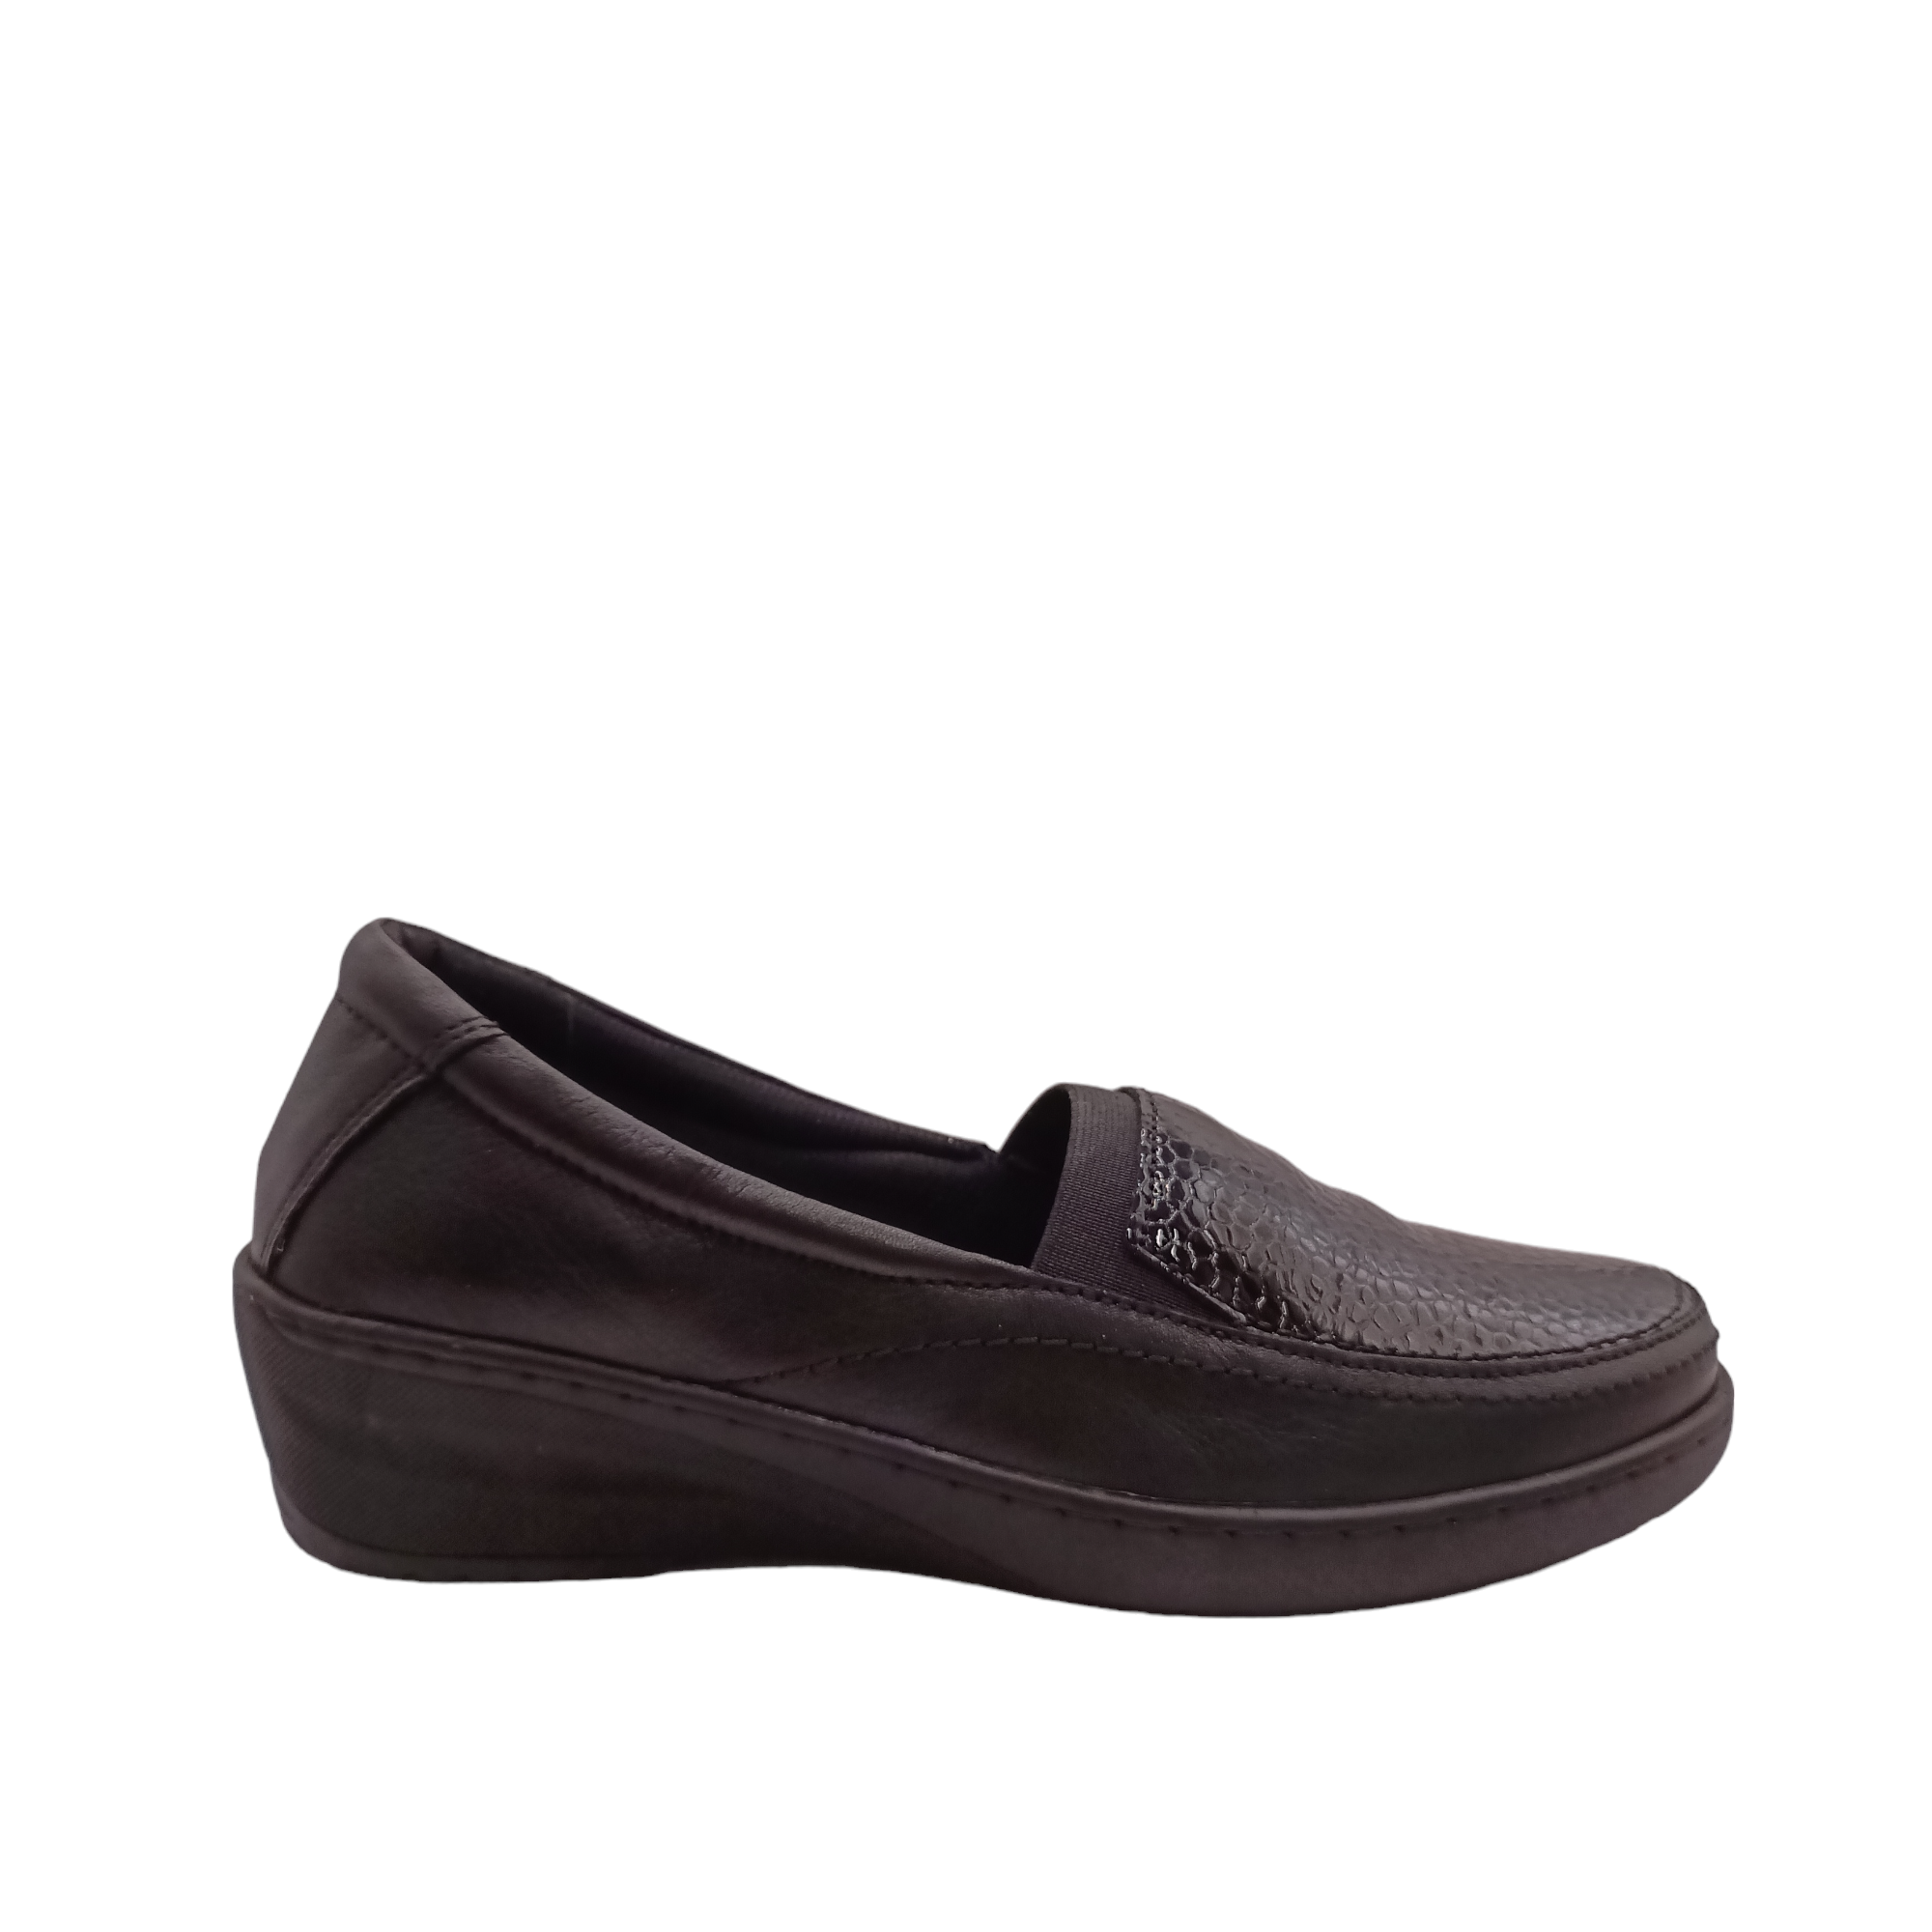 Shop CP149-18 Cabello - with shoe&me - from Cabello - Shoes - Shoe, Winter, Womens - [collection]